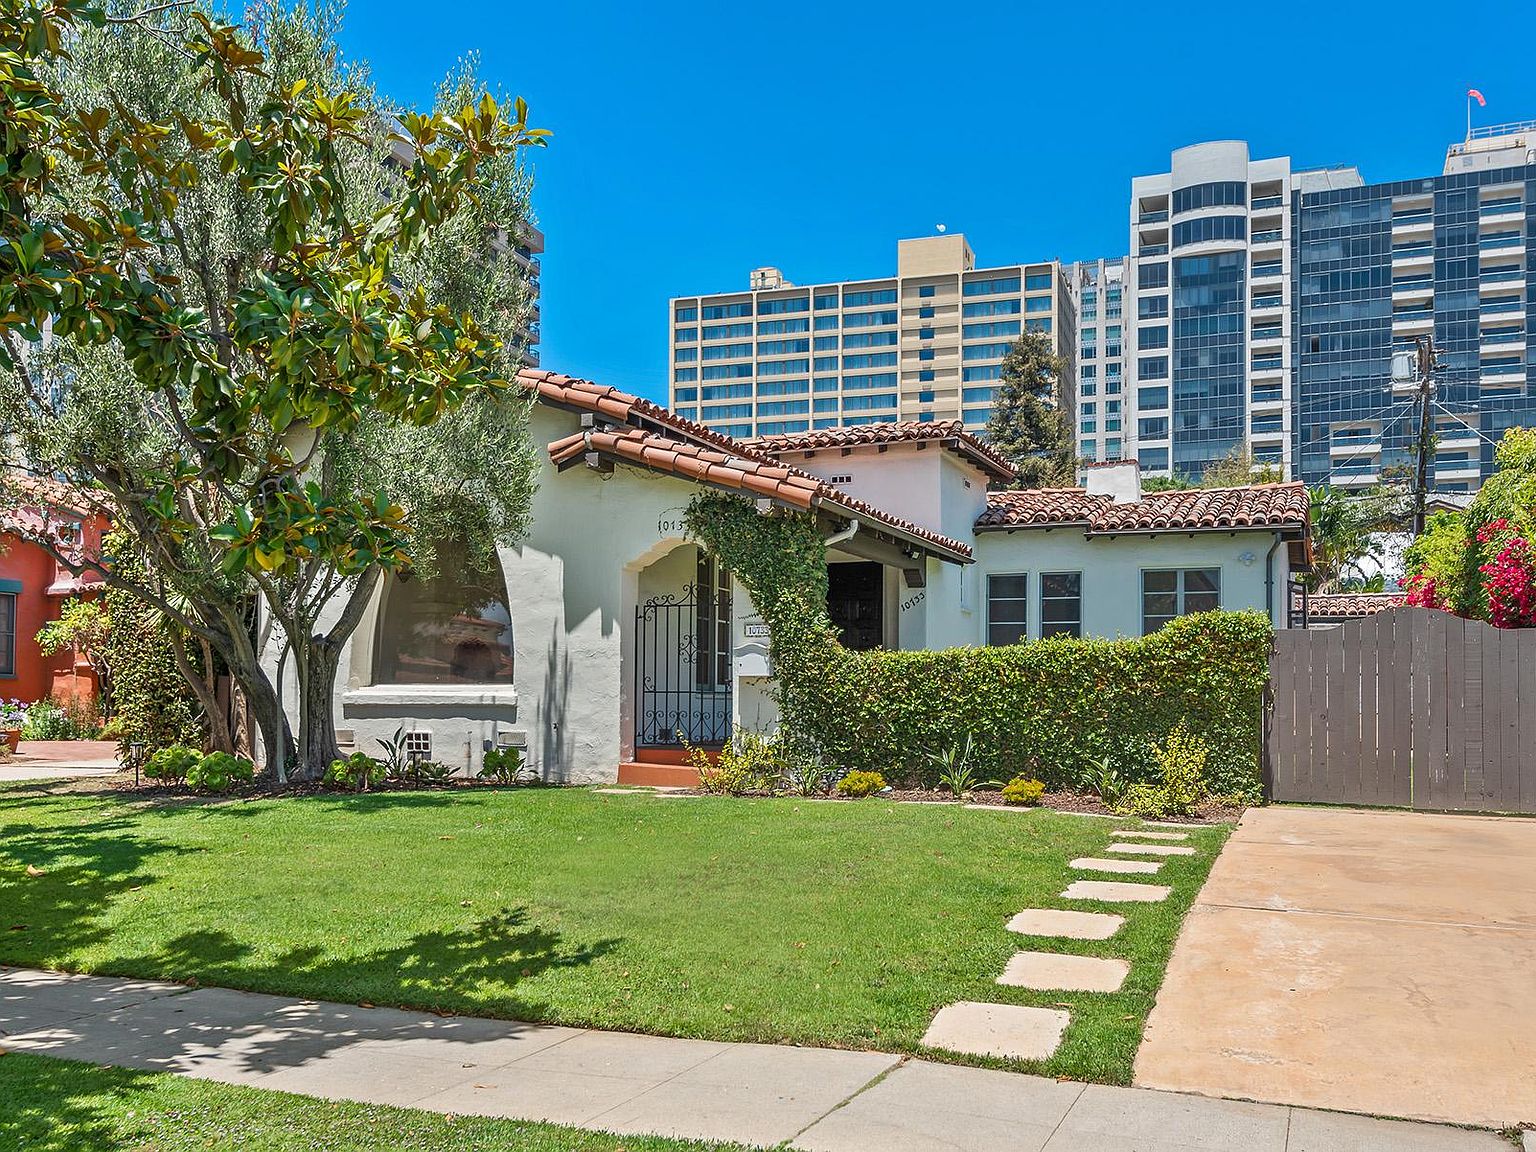 10733 Wellworth Ave, Los Angeles, CA 90024 | Zillow